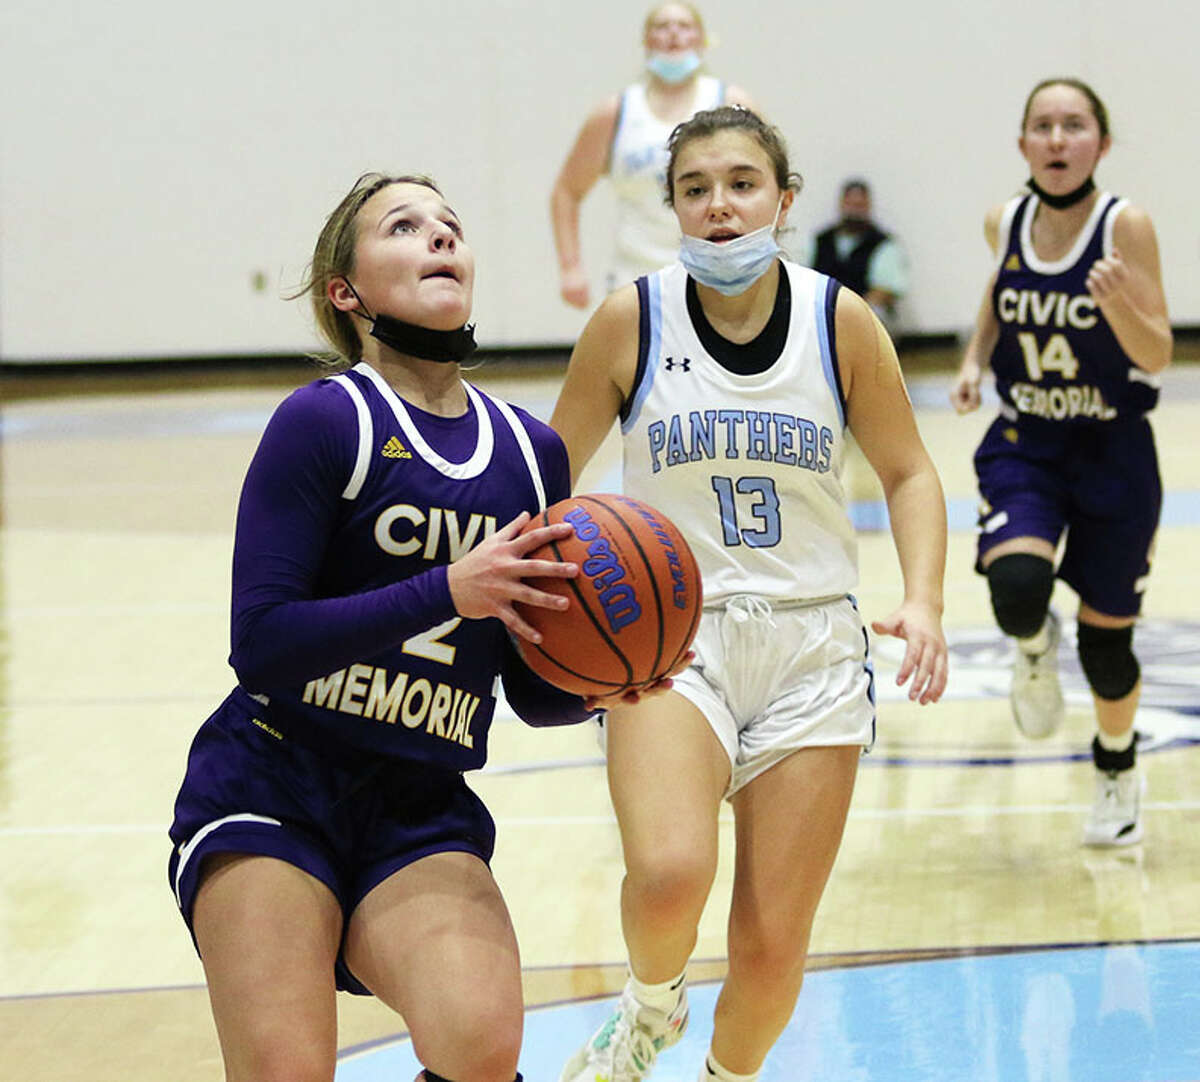 CM's Avari Combes (left) goes in for a layup ahead of Jersey's Cate Breden (13) in a game last season in Jerseyville. On Friday, the Eagles lost their season opener at the Taylorville Tourney, while the Panthers won big at home Madison in Jerseyville.